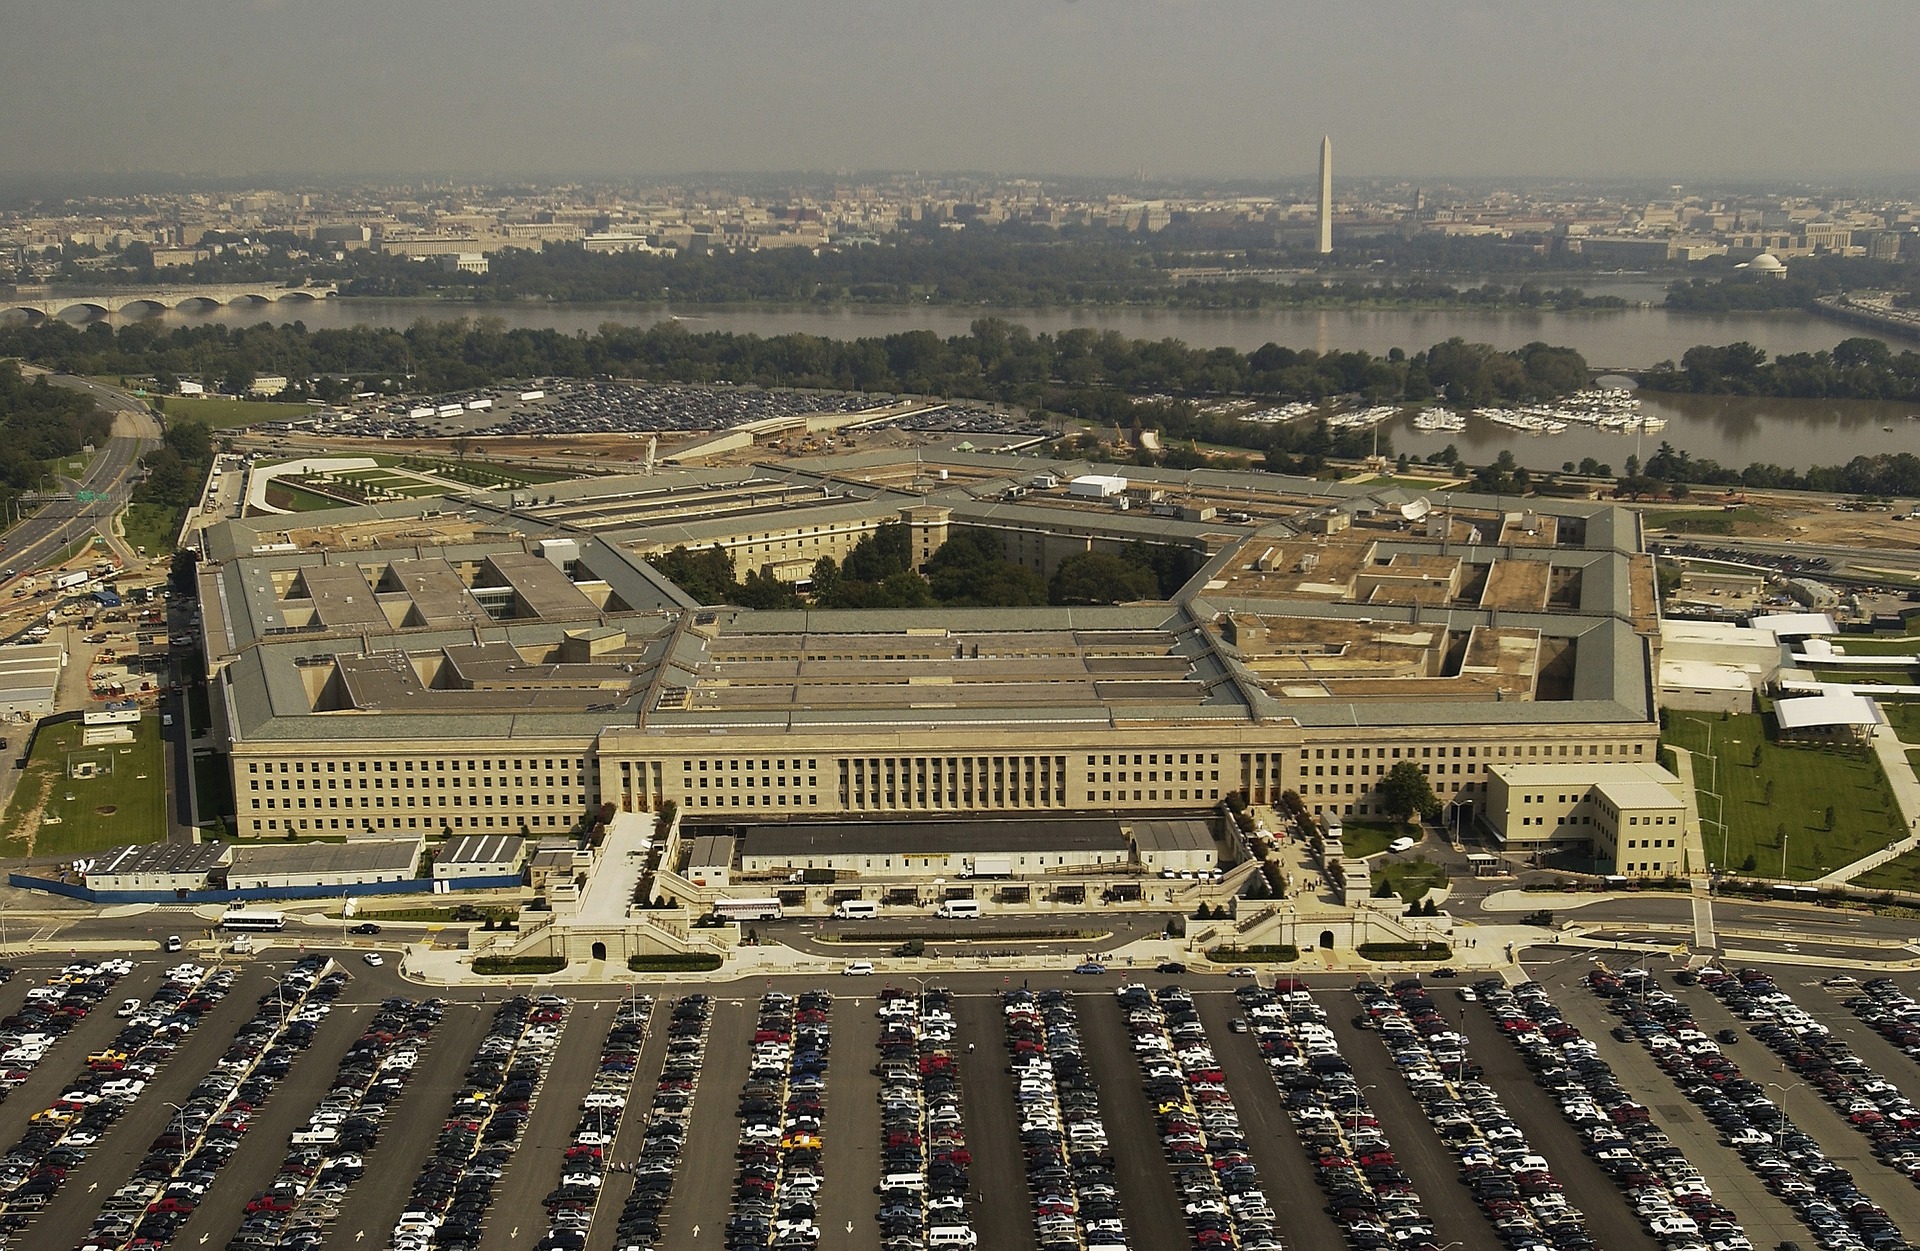 Aerial daytime view of the Pentagon in Washington, D.C., with the Potomac River in the background